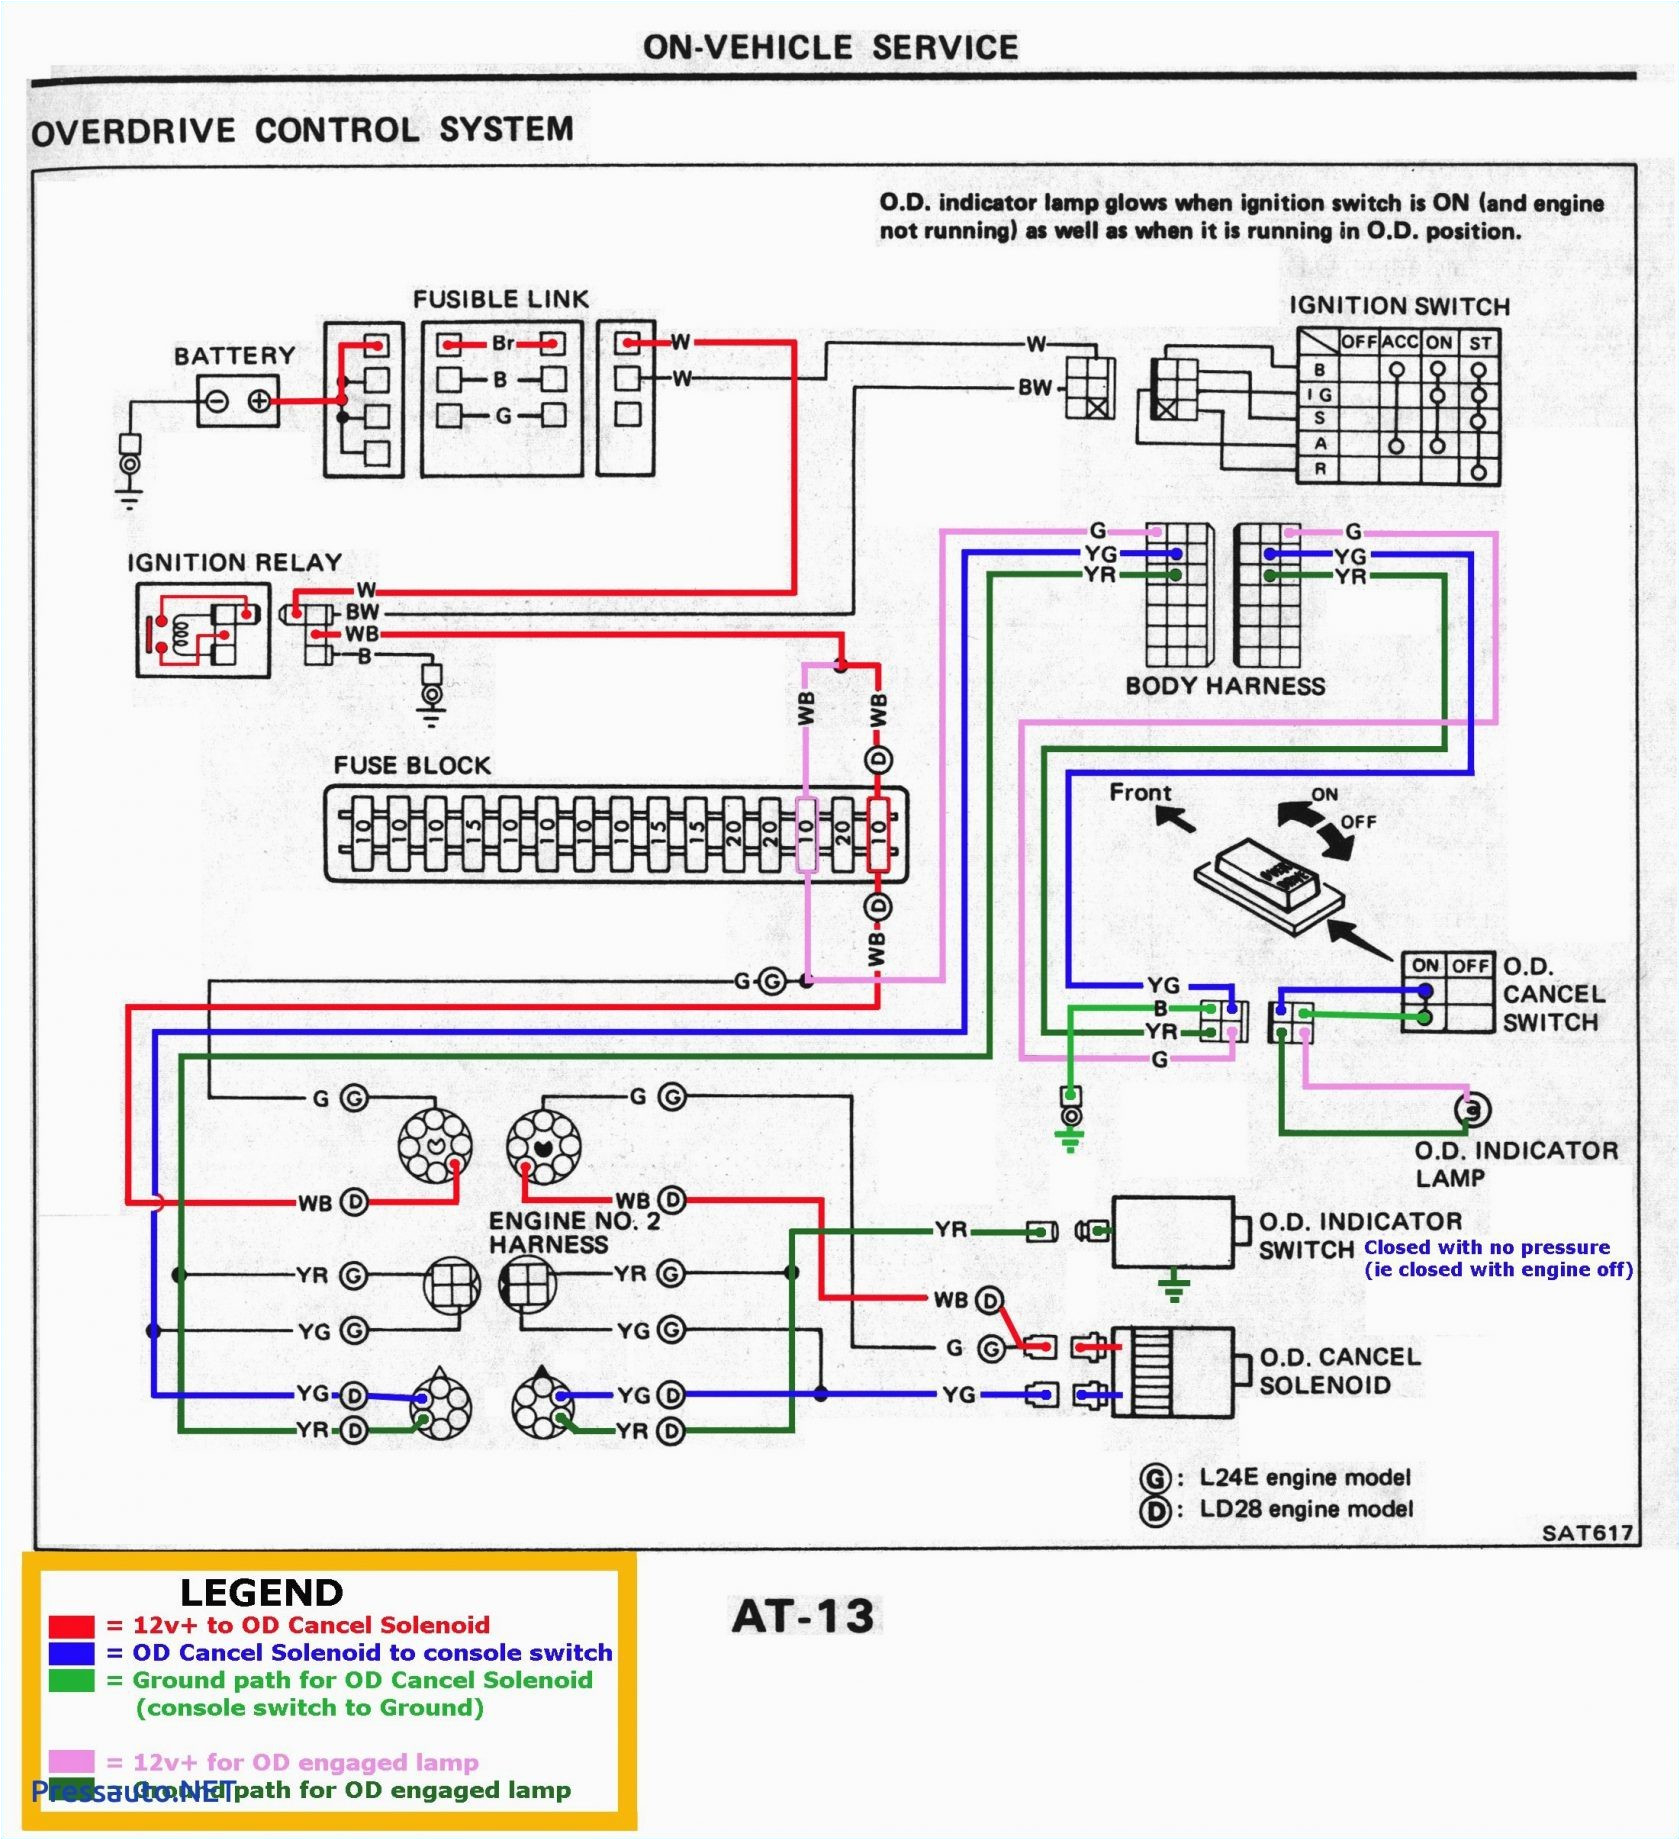 Ford 4000 Wiring Diagram Pictures 2005 Impala Power Window Switch Wiring Schematic Wiring Diagram